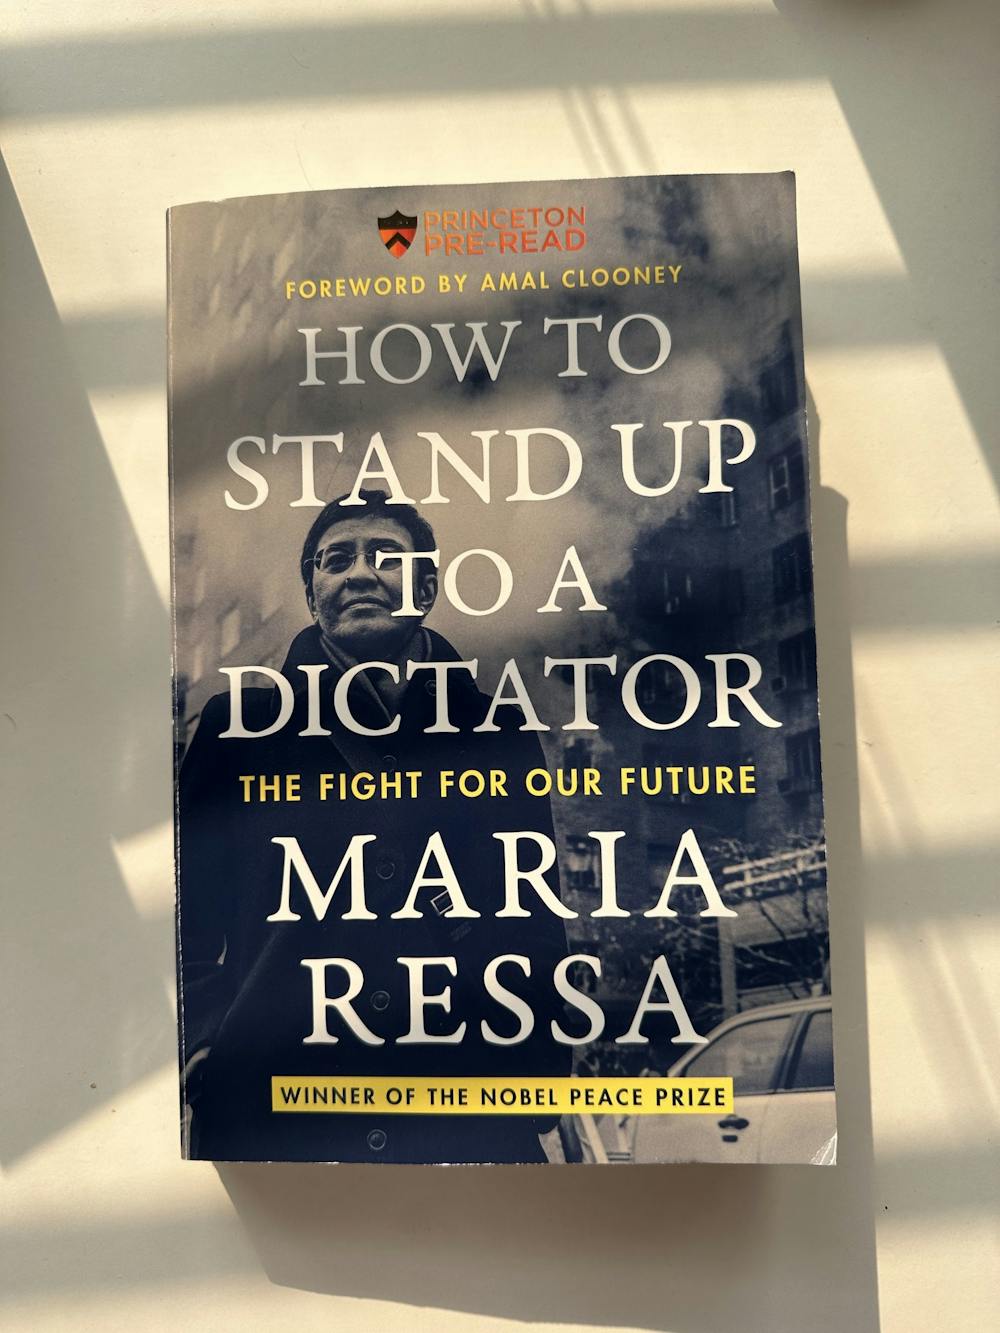 Photo of the cover of Maria Ressa's book, How to Stand Up to a Dictator. Cover is a photo of Ressa color-corrected to blue overlaid in with title in large white text.